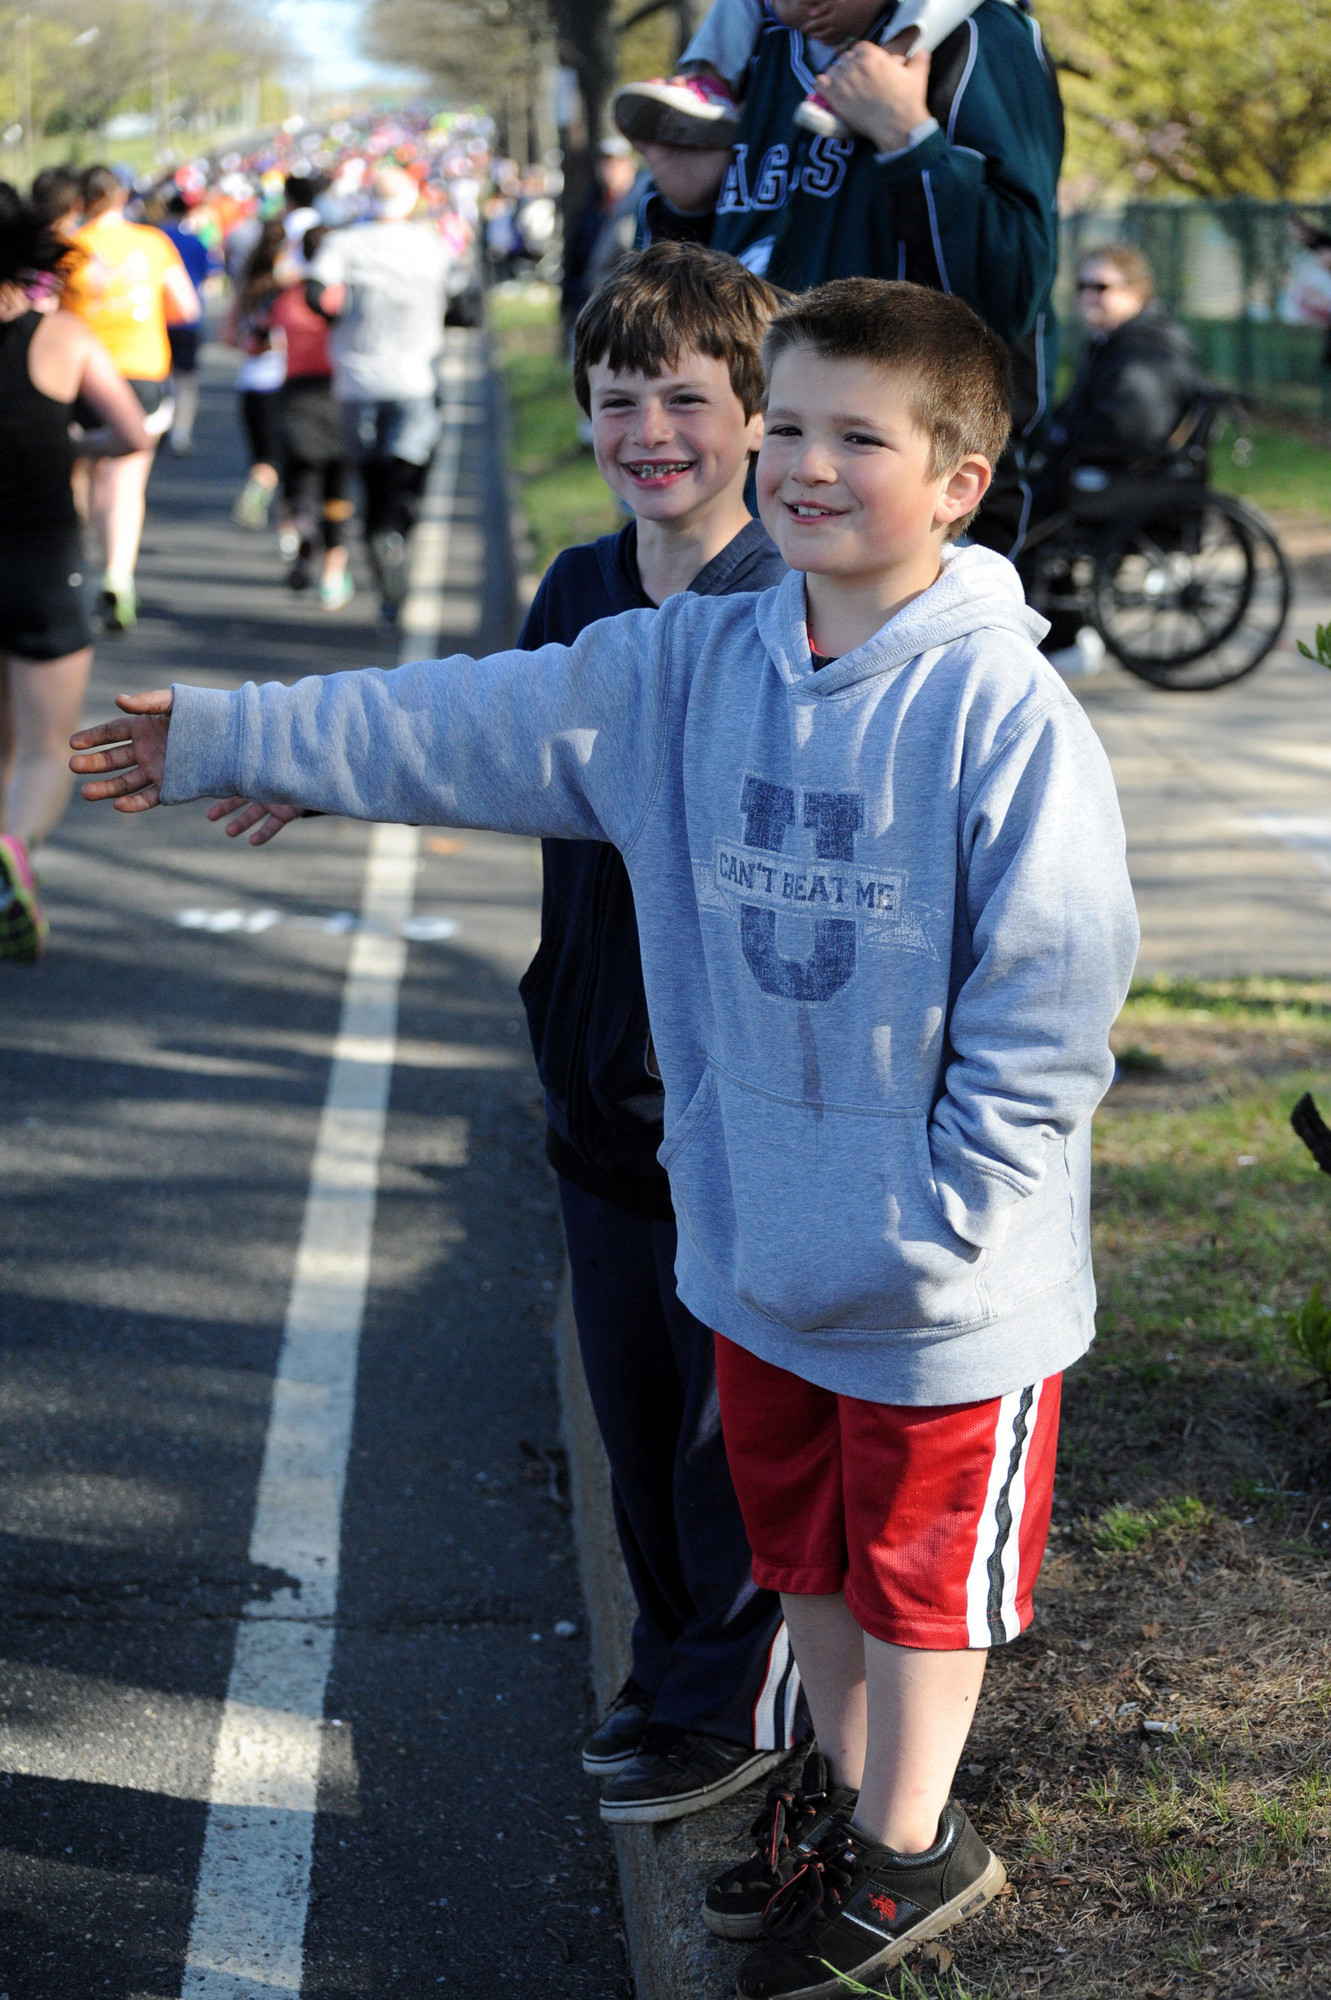 Sean Smith and Logan Schwartz, both 8, were two of 25,000 spectators who came out to support the runners.